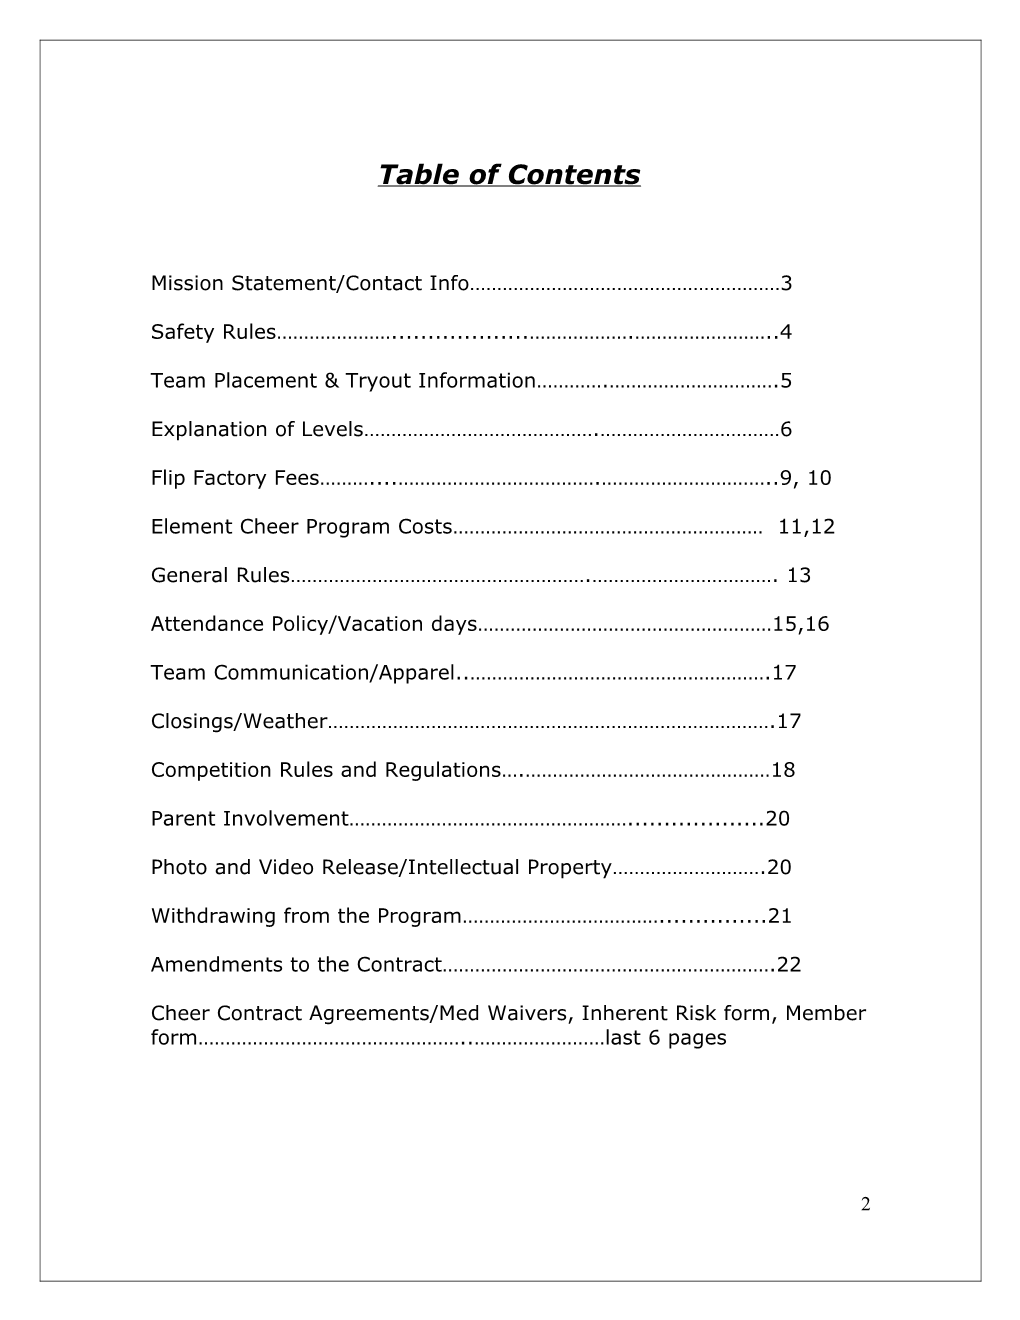 Table of Contents s295